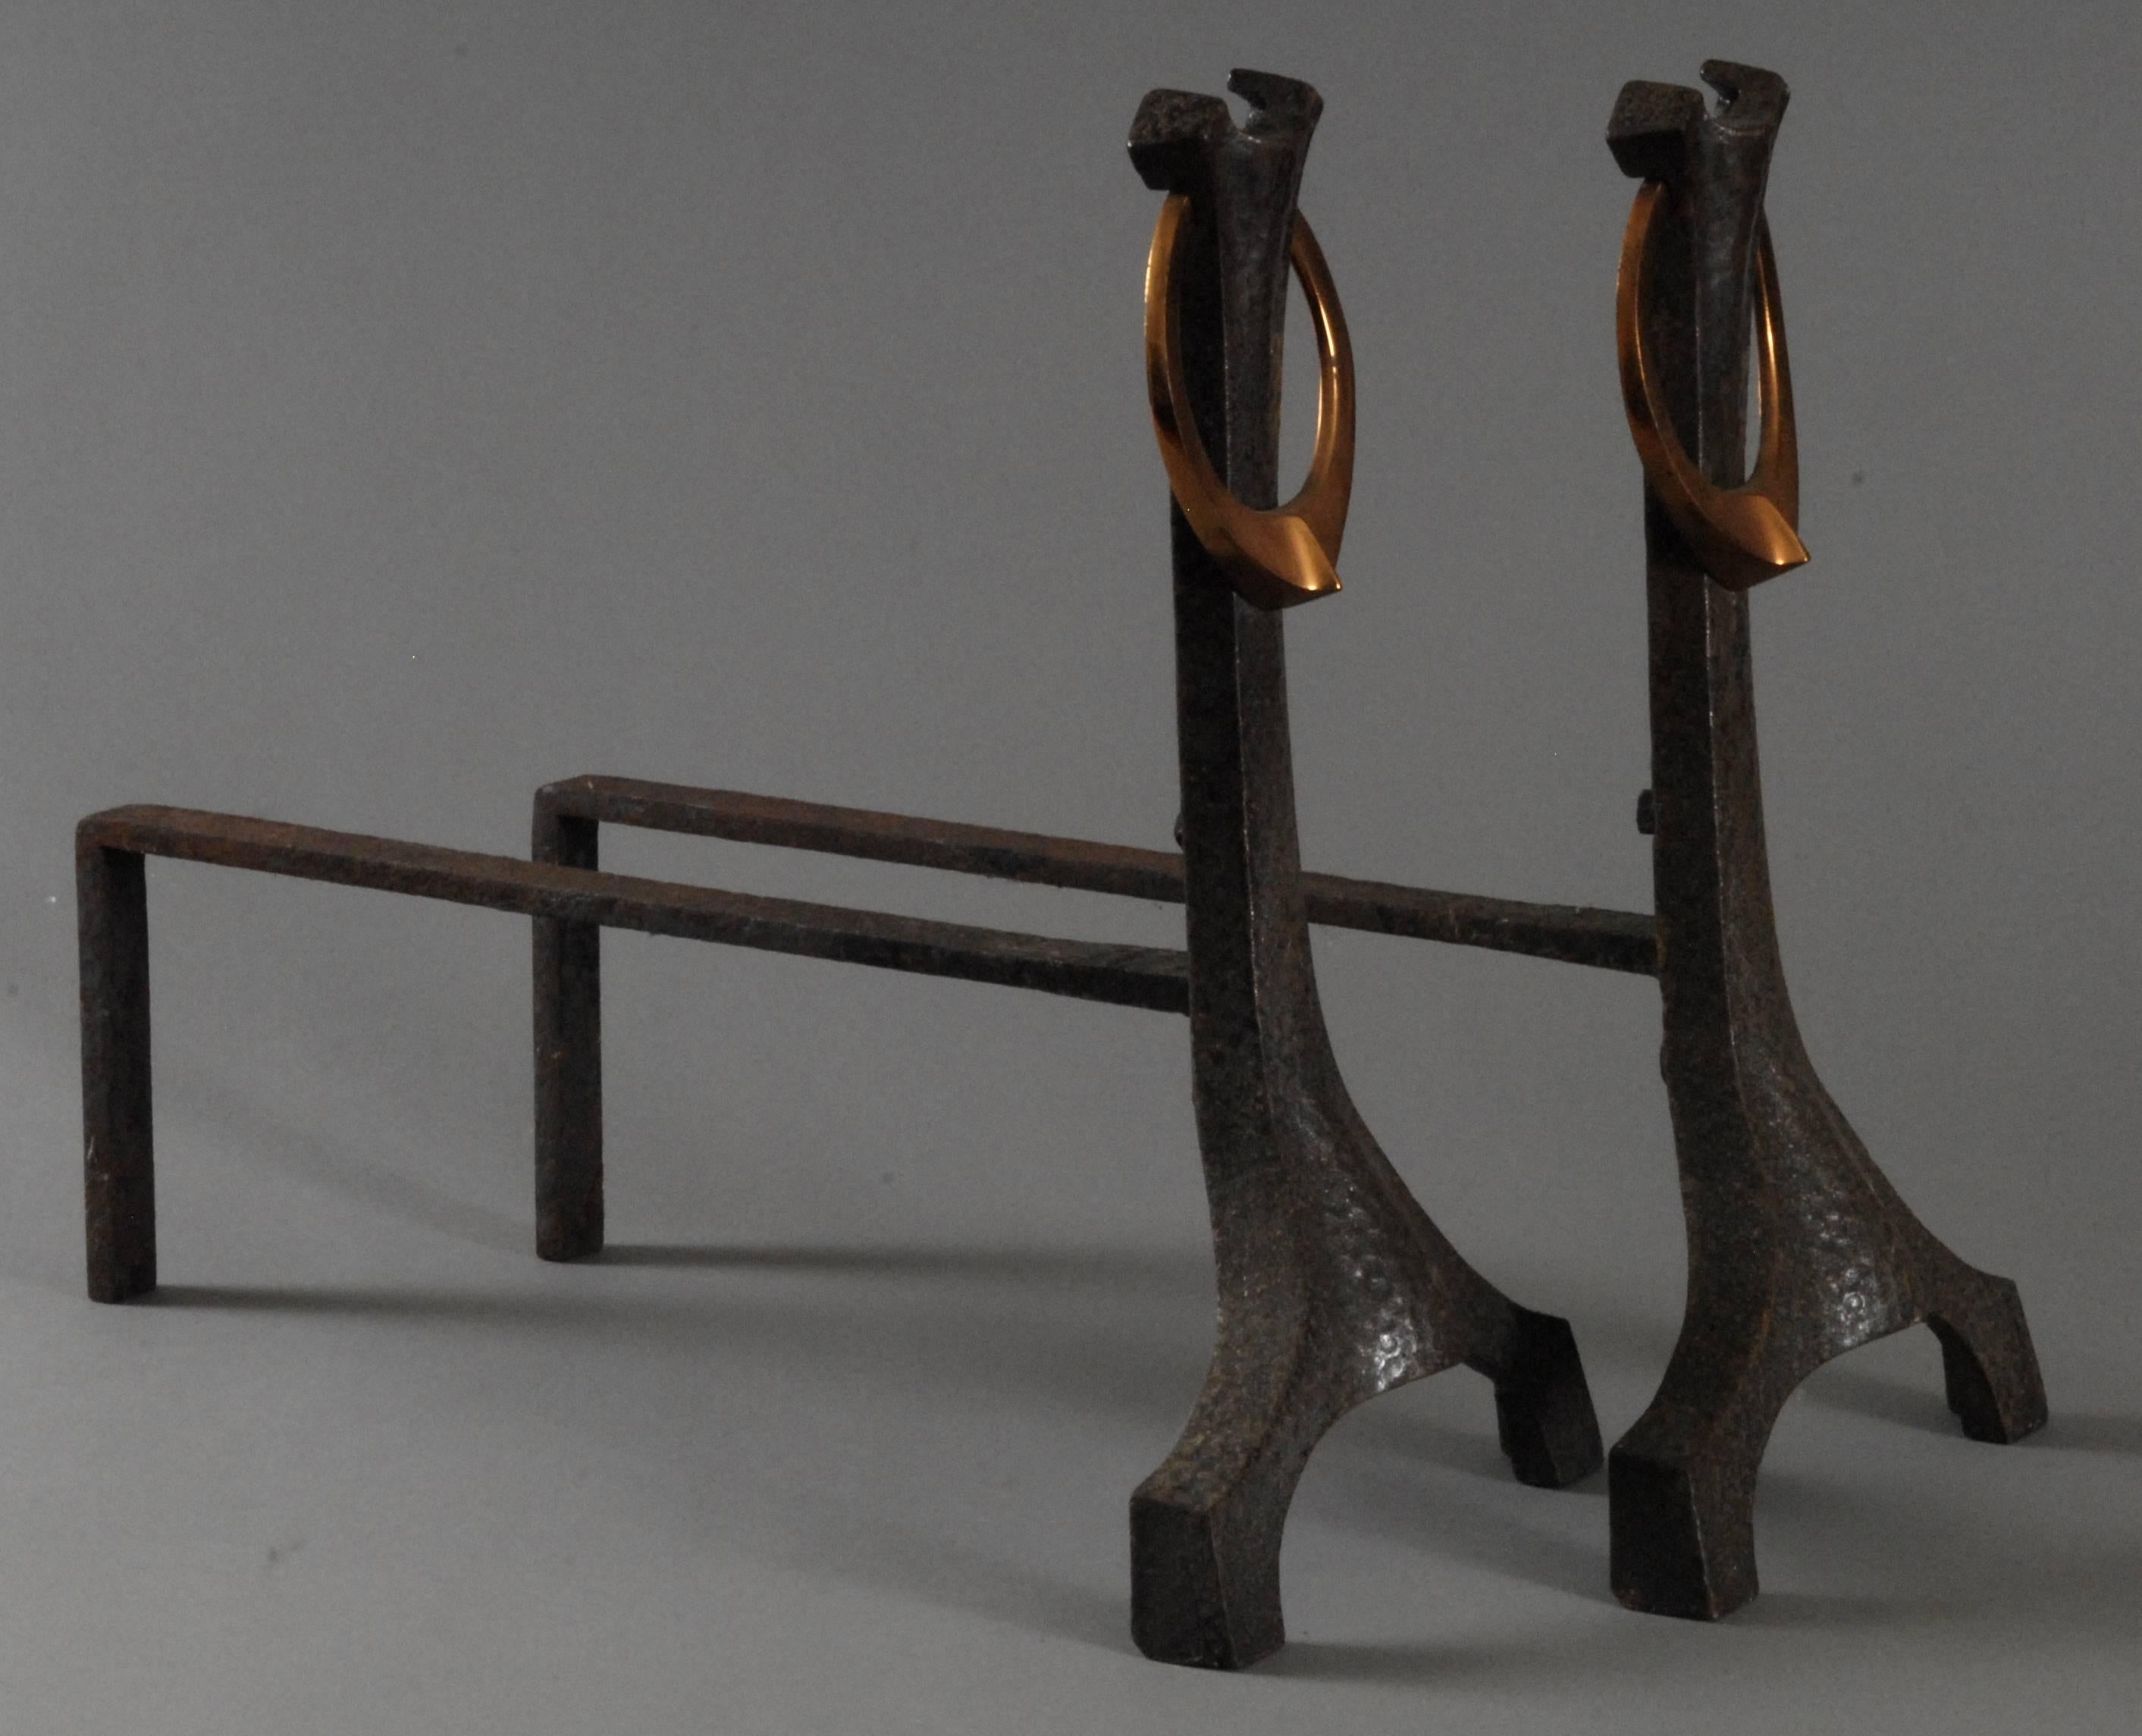 A pair of hammertone finished firedogs with a copper loop affixed to the sweeping shaped curving top. The body sweeping down to a pair of spreading feet and balanced by the protruding rear andiron. Typical Arts & Crafts styling, in immaculate